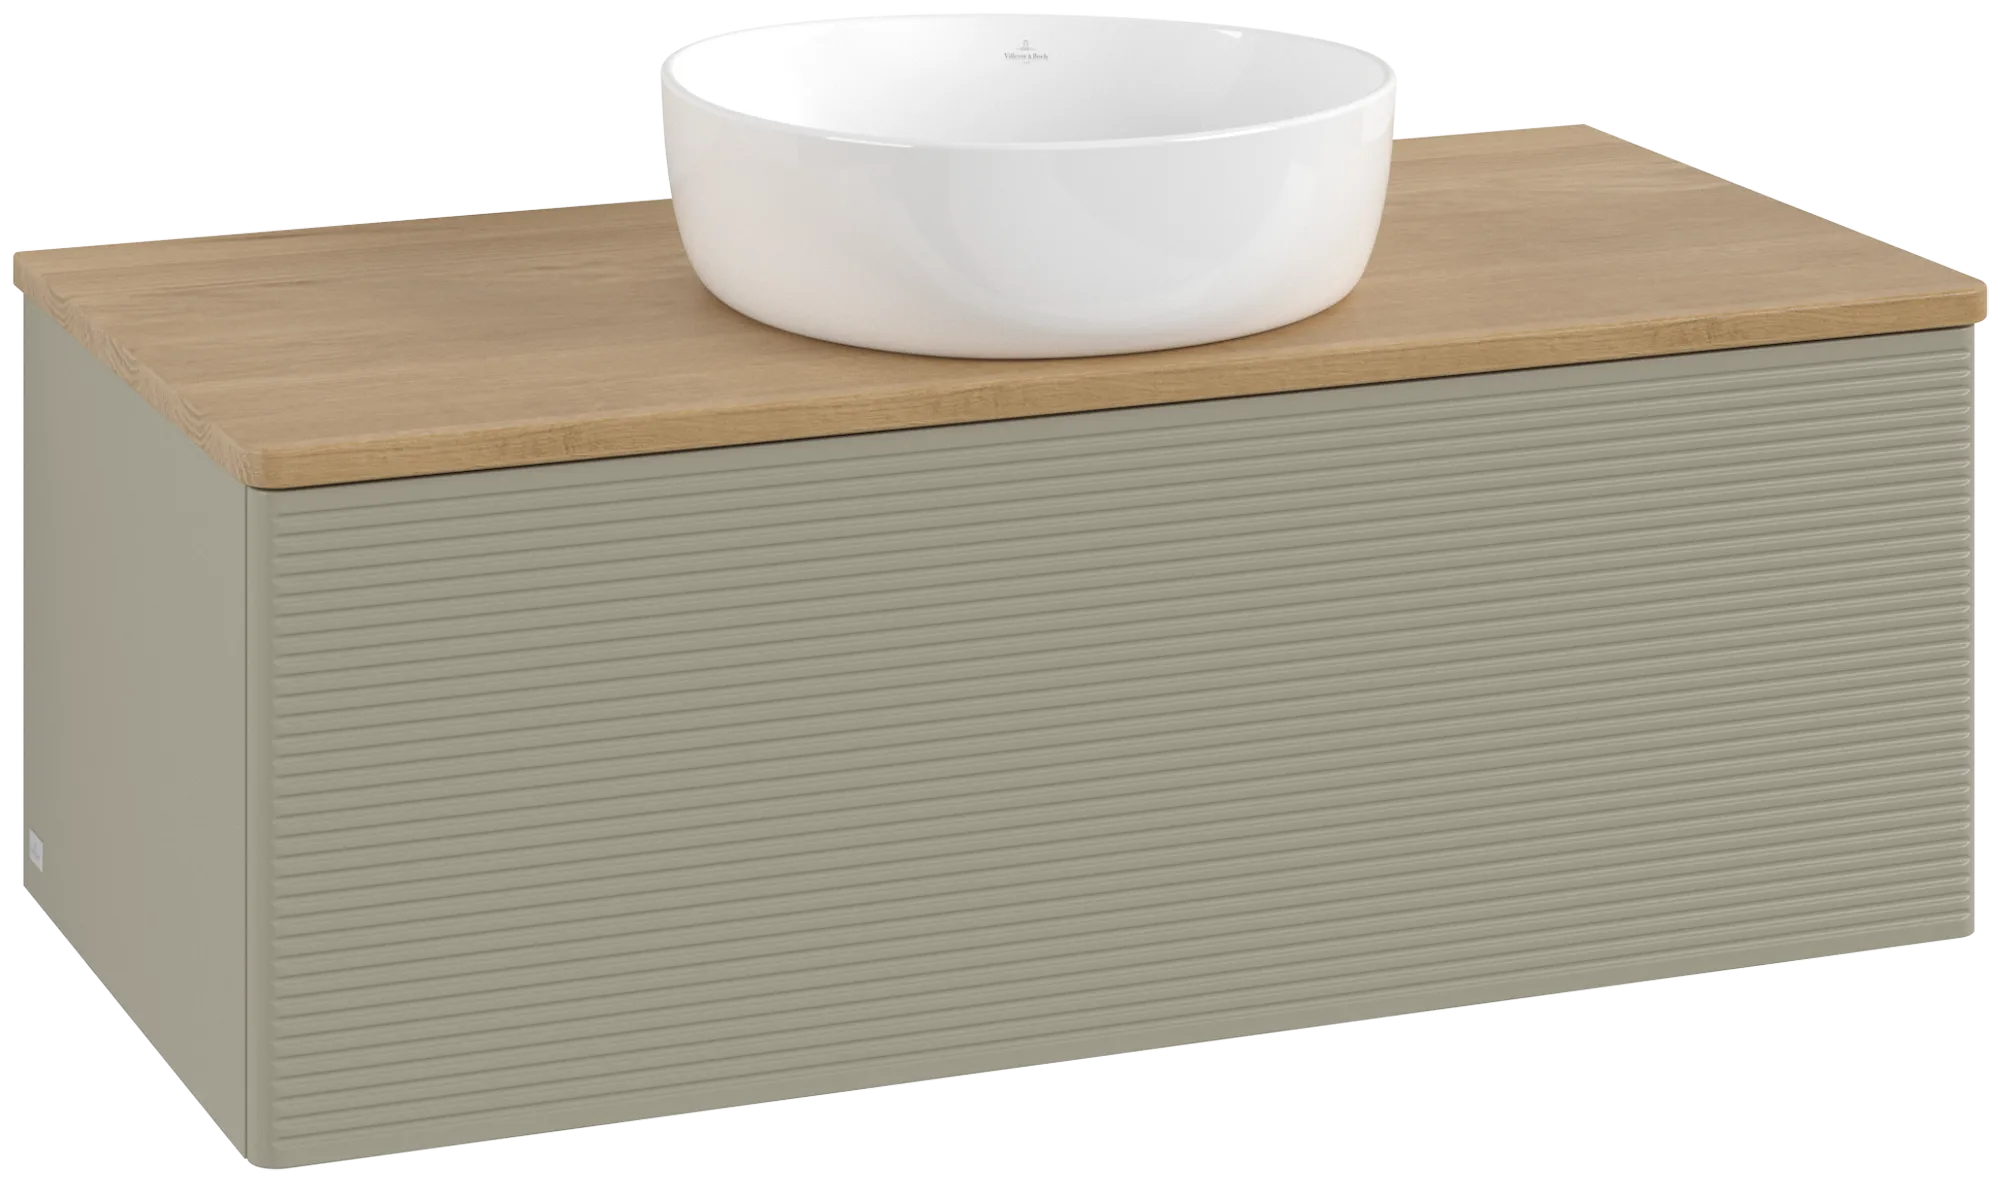 Picture of VILLEROY BOCH Antao Vanity unit, with lighting, 1 pull-out compartment, 1000 x 360 x 500 mm, Front with grain texture, Stone Grey Matt Lacquer / Honey Oak #L31111HK